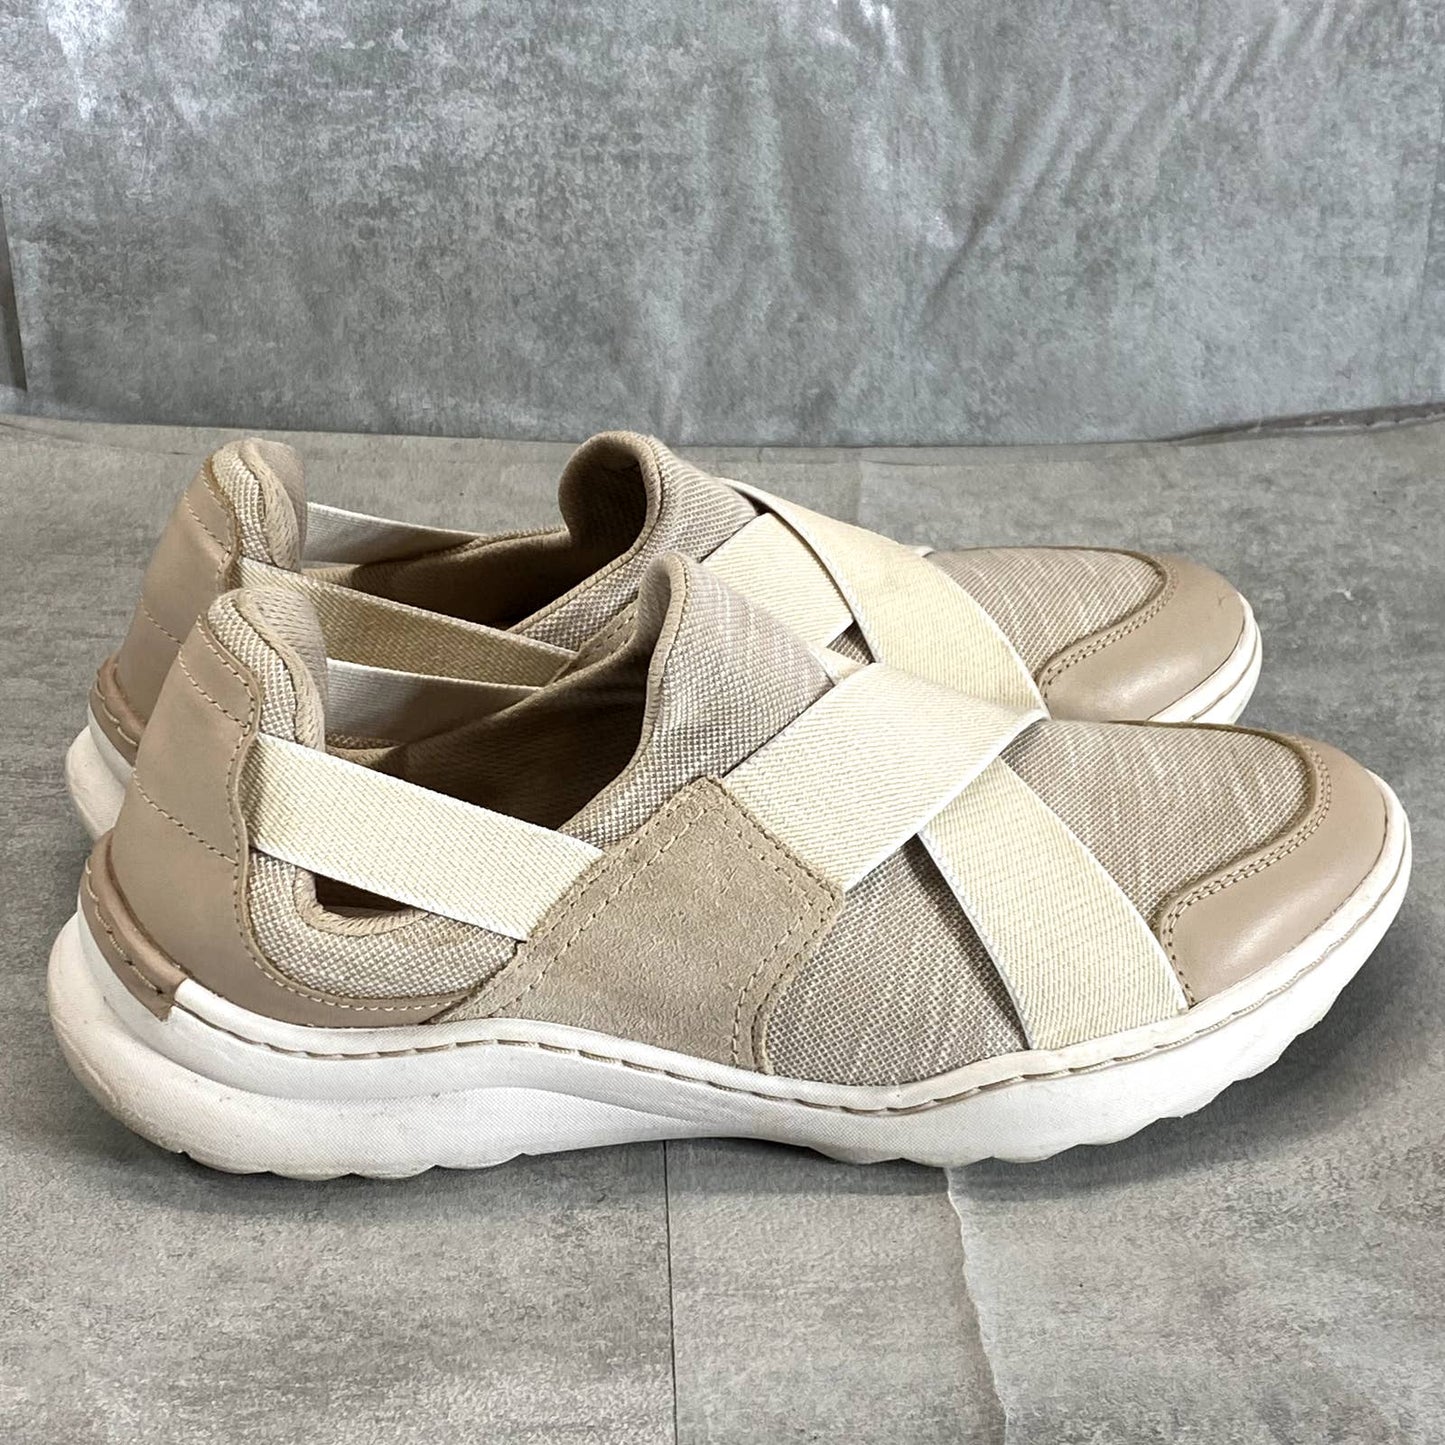 CLARKS COLLECTION Women's Sand Combination Teagan Go Slip-On Sneakers SZ 9